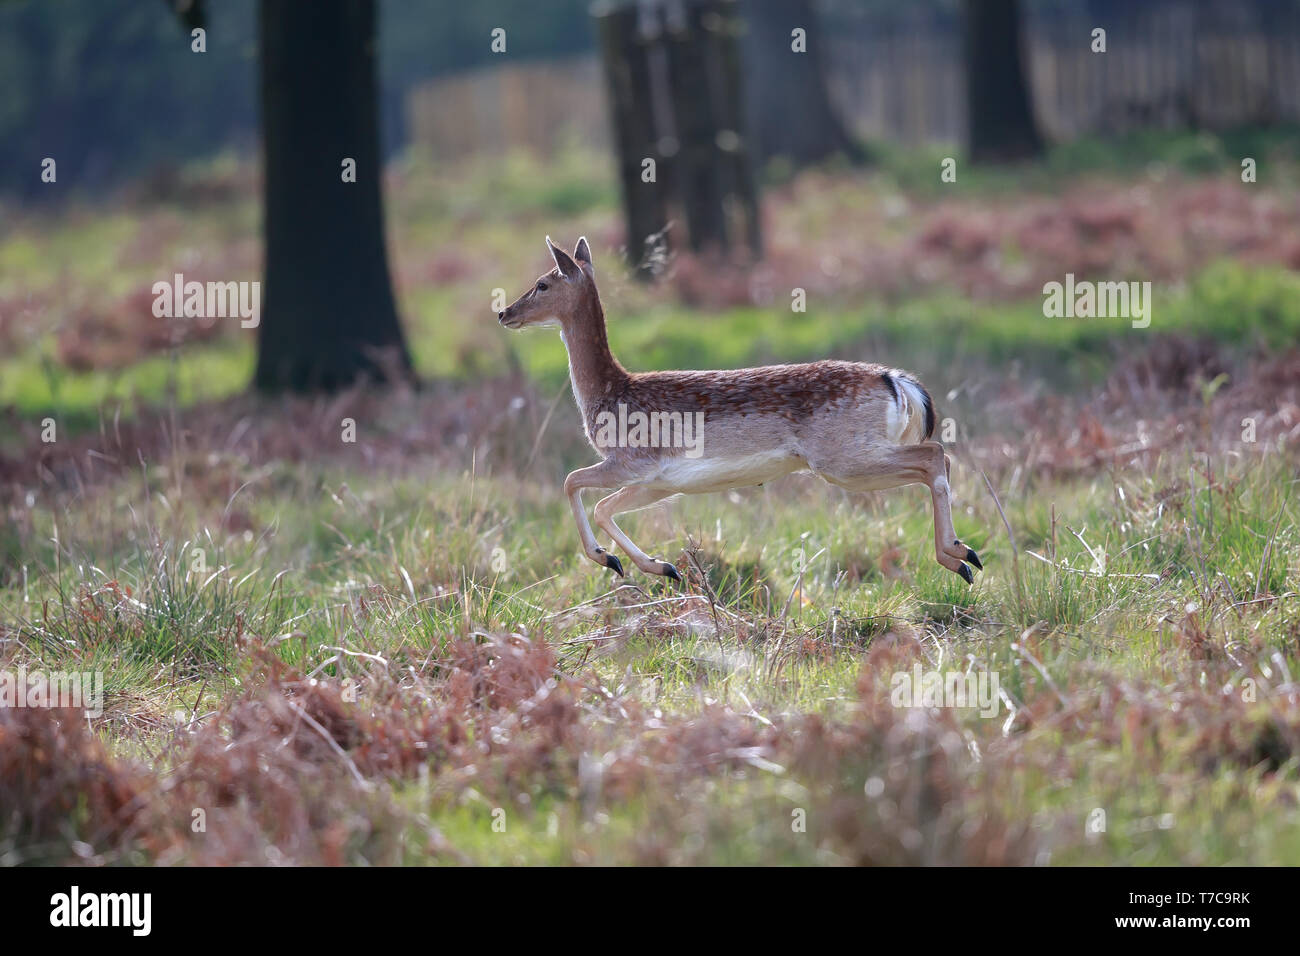 The fallow deer is a ruminant mammal belonging to the family Cervidae. Stock Photo